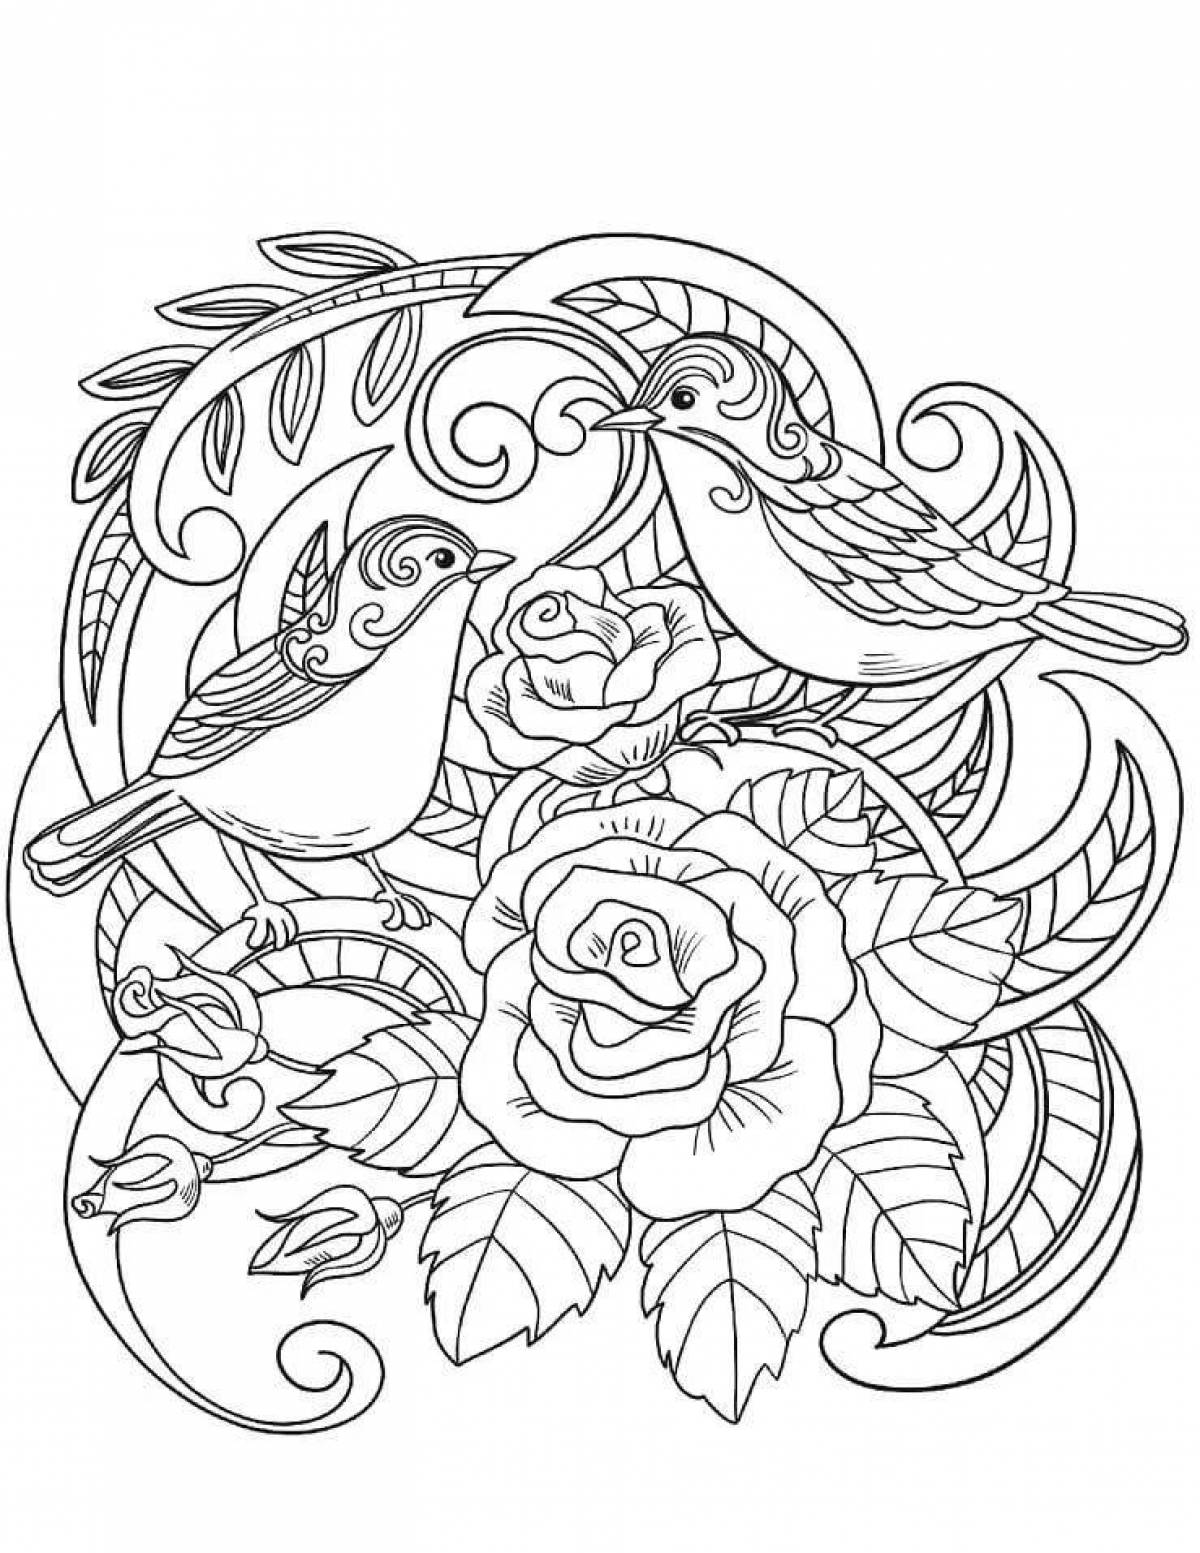 Updating the medium coloring page